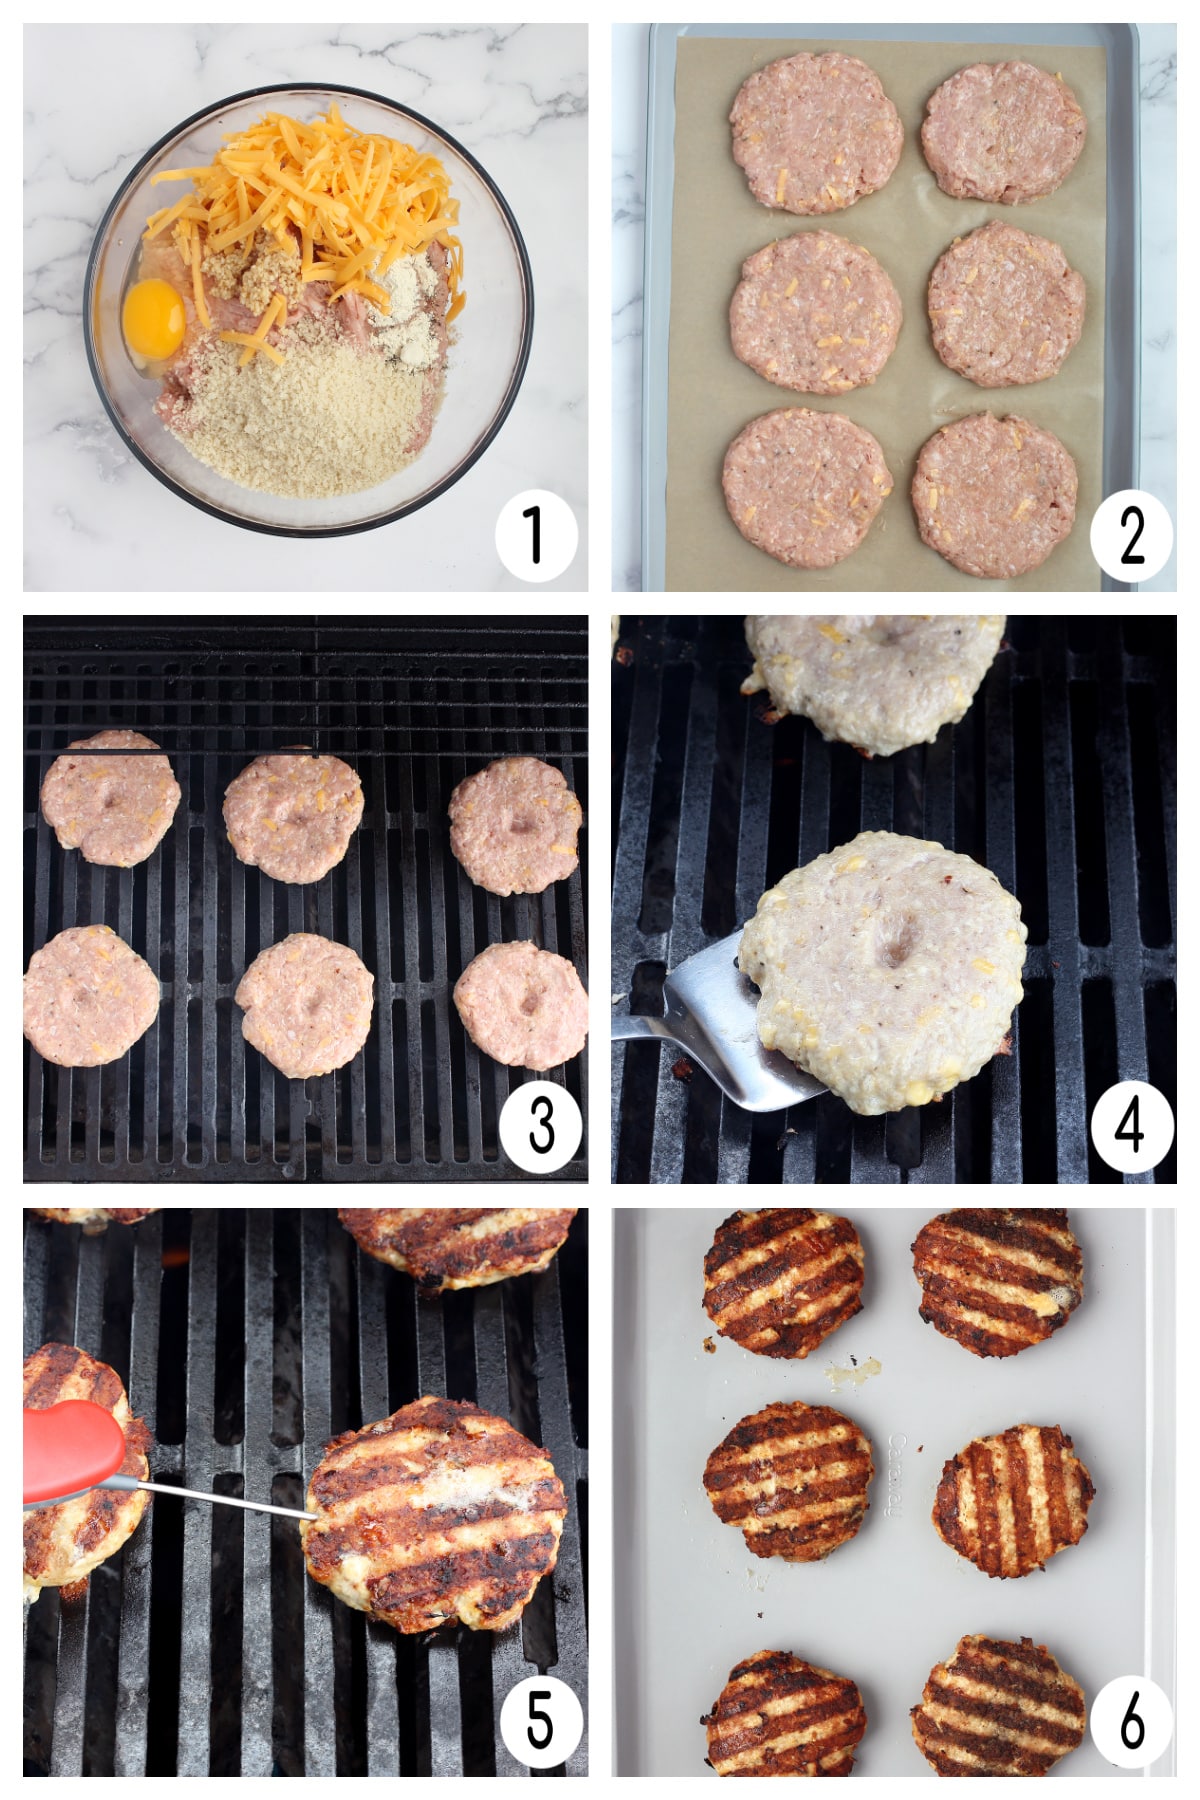 Process footage of how to make a turkey burger.